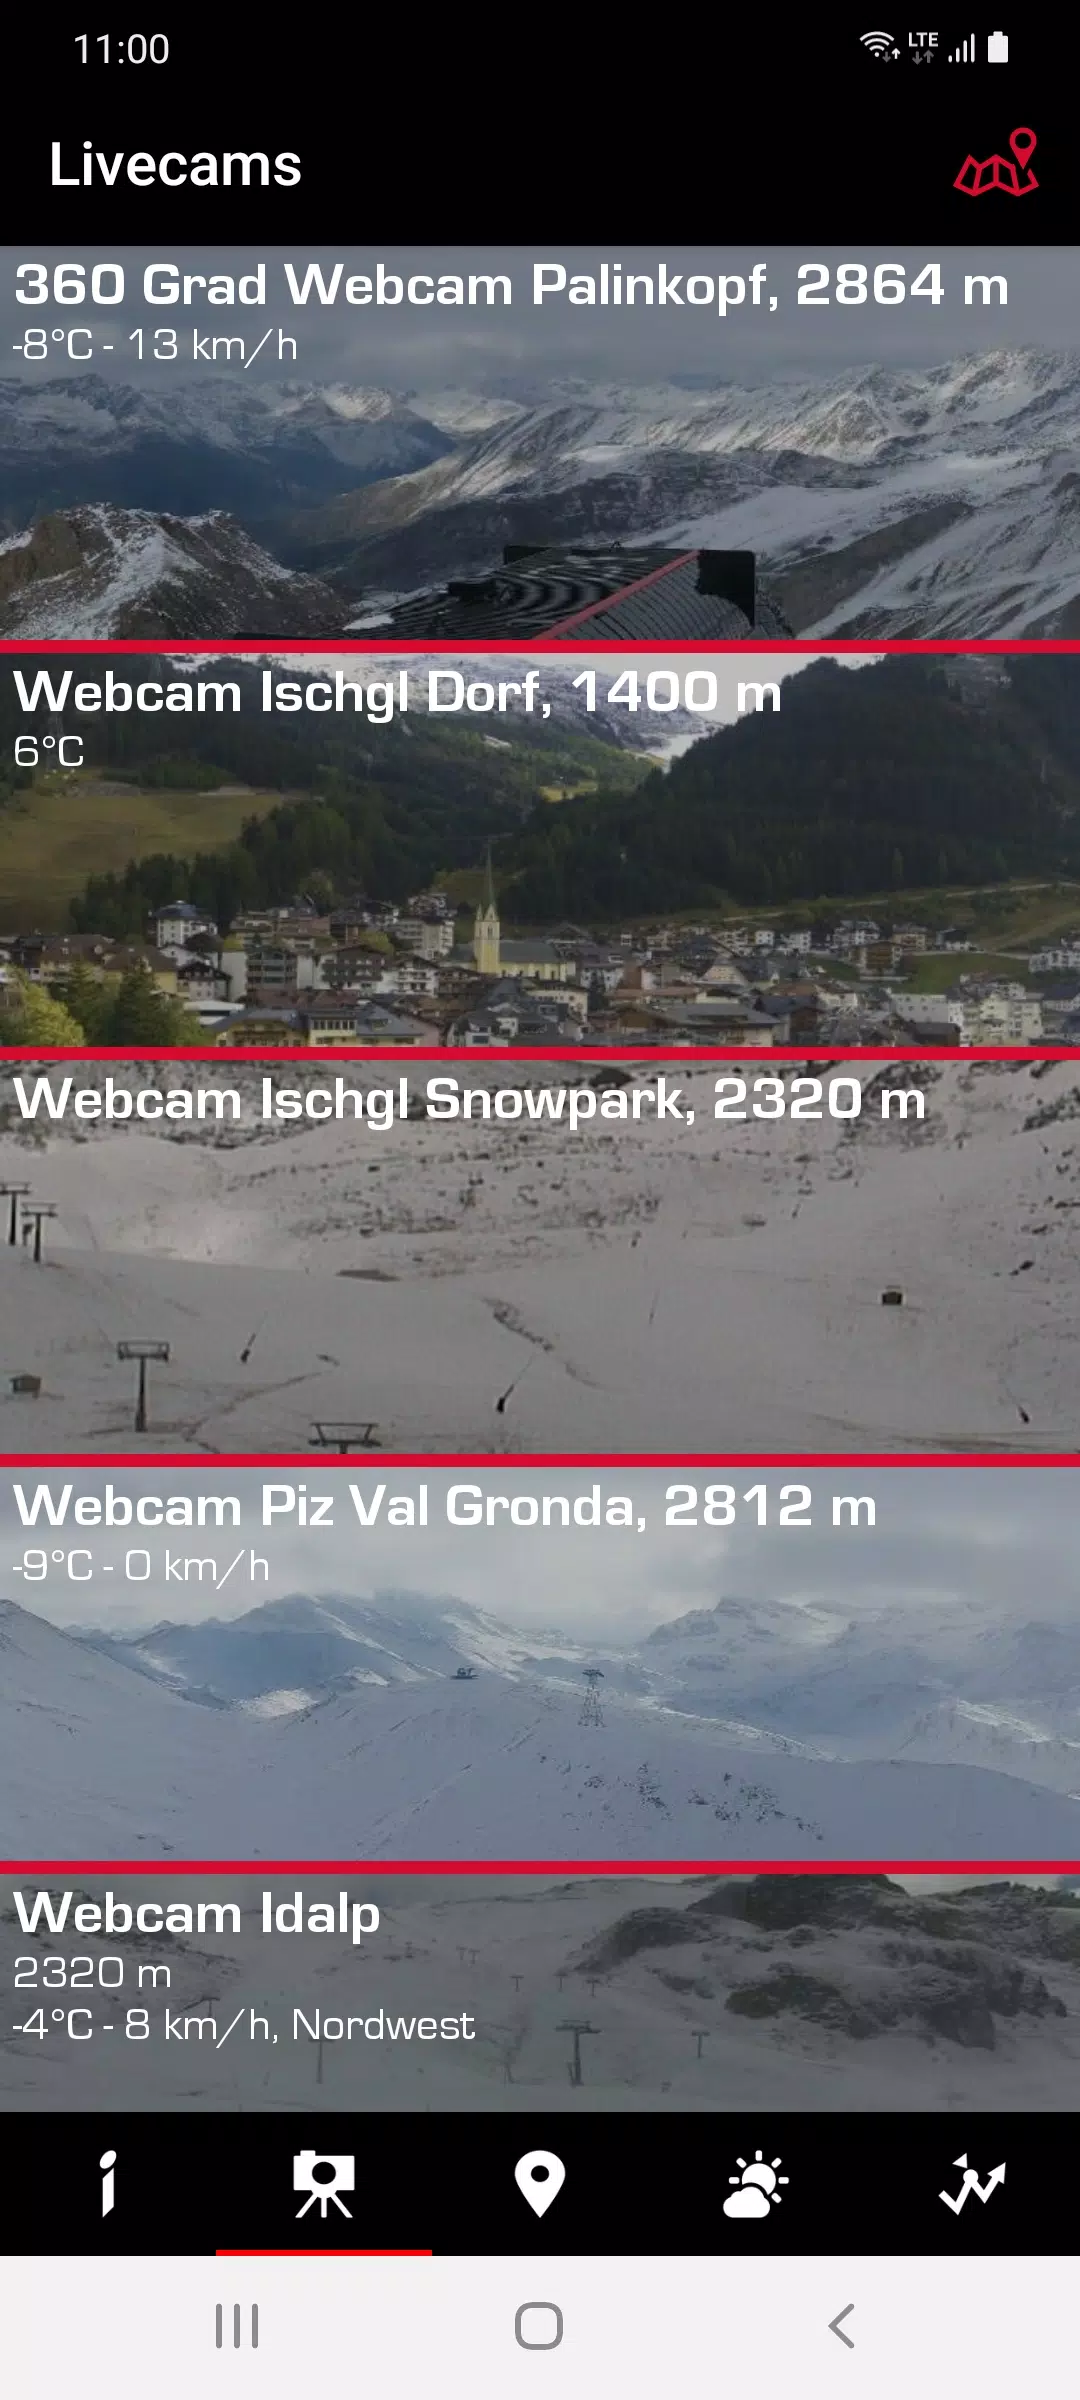 iSki Ischgl for Android - APK Download